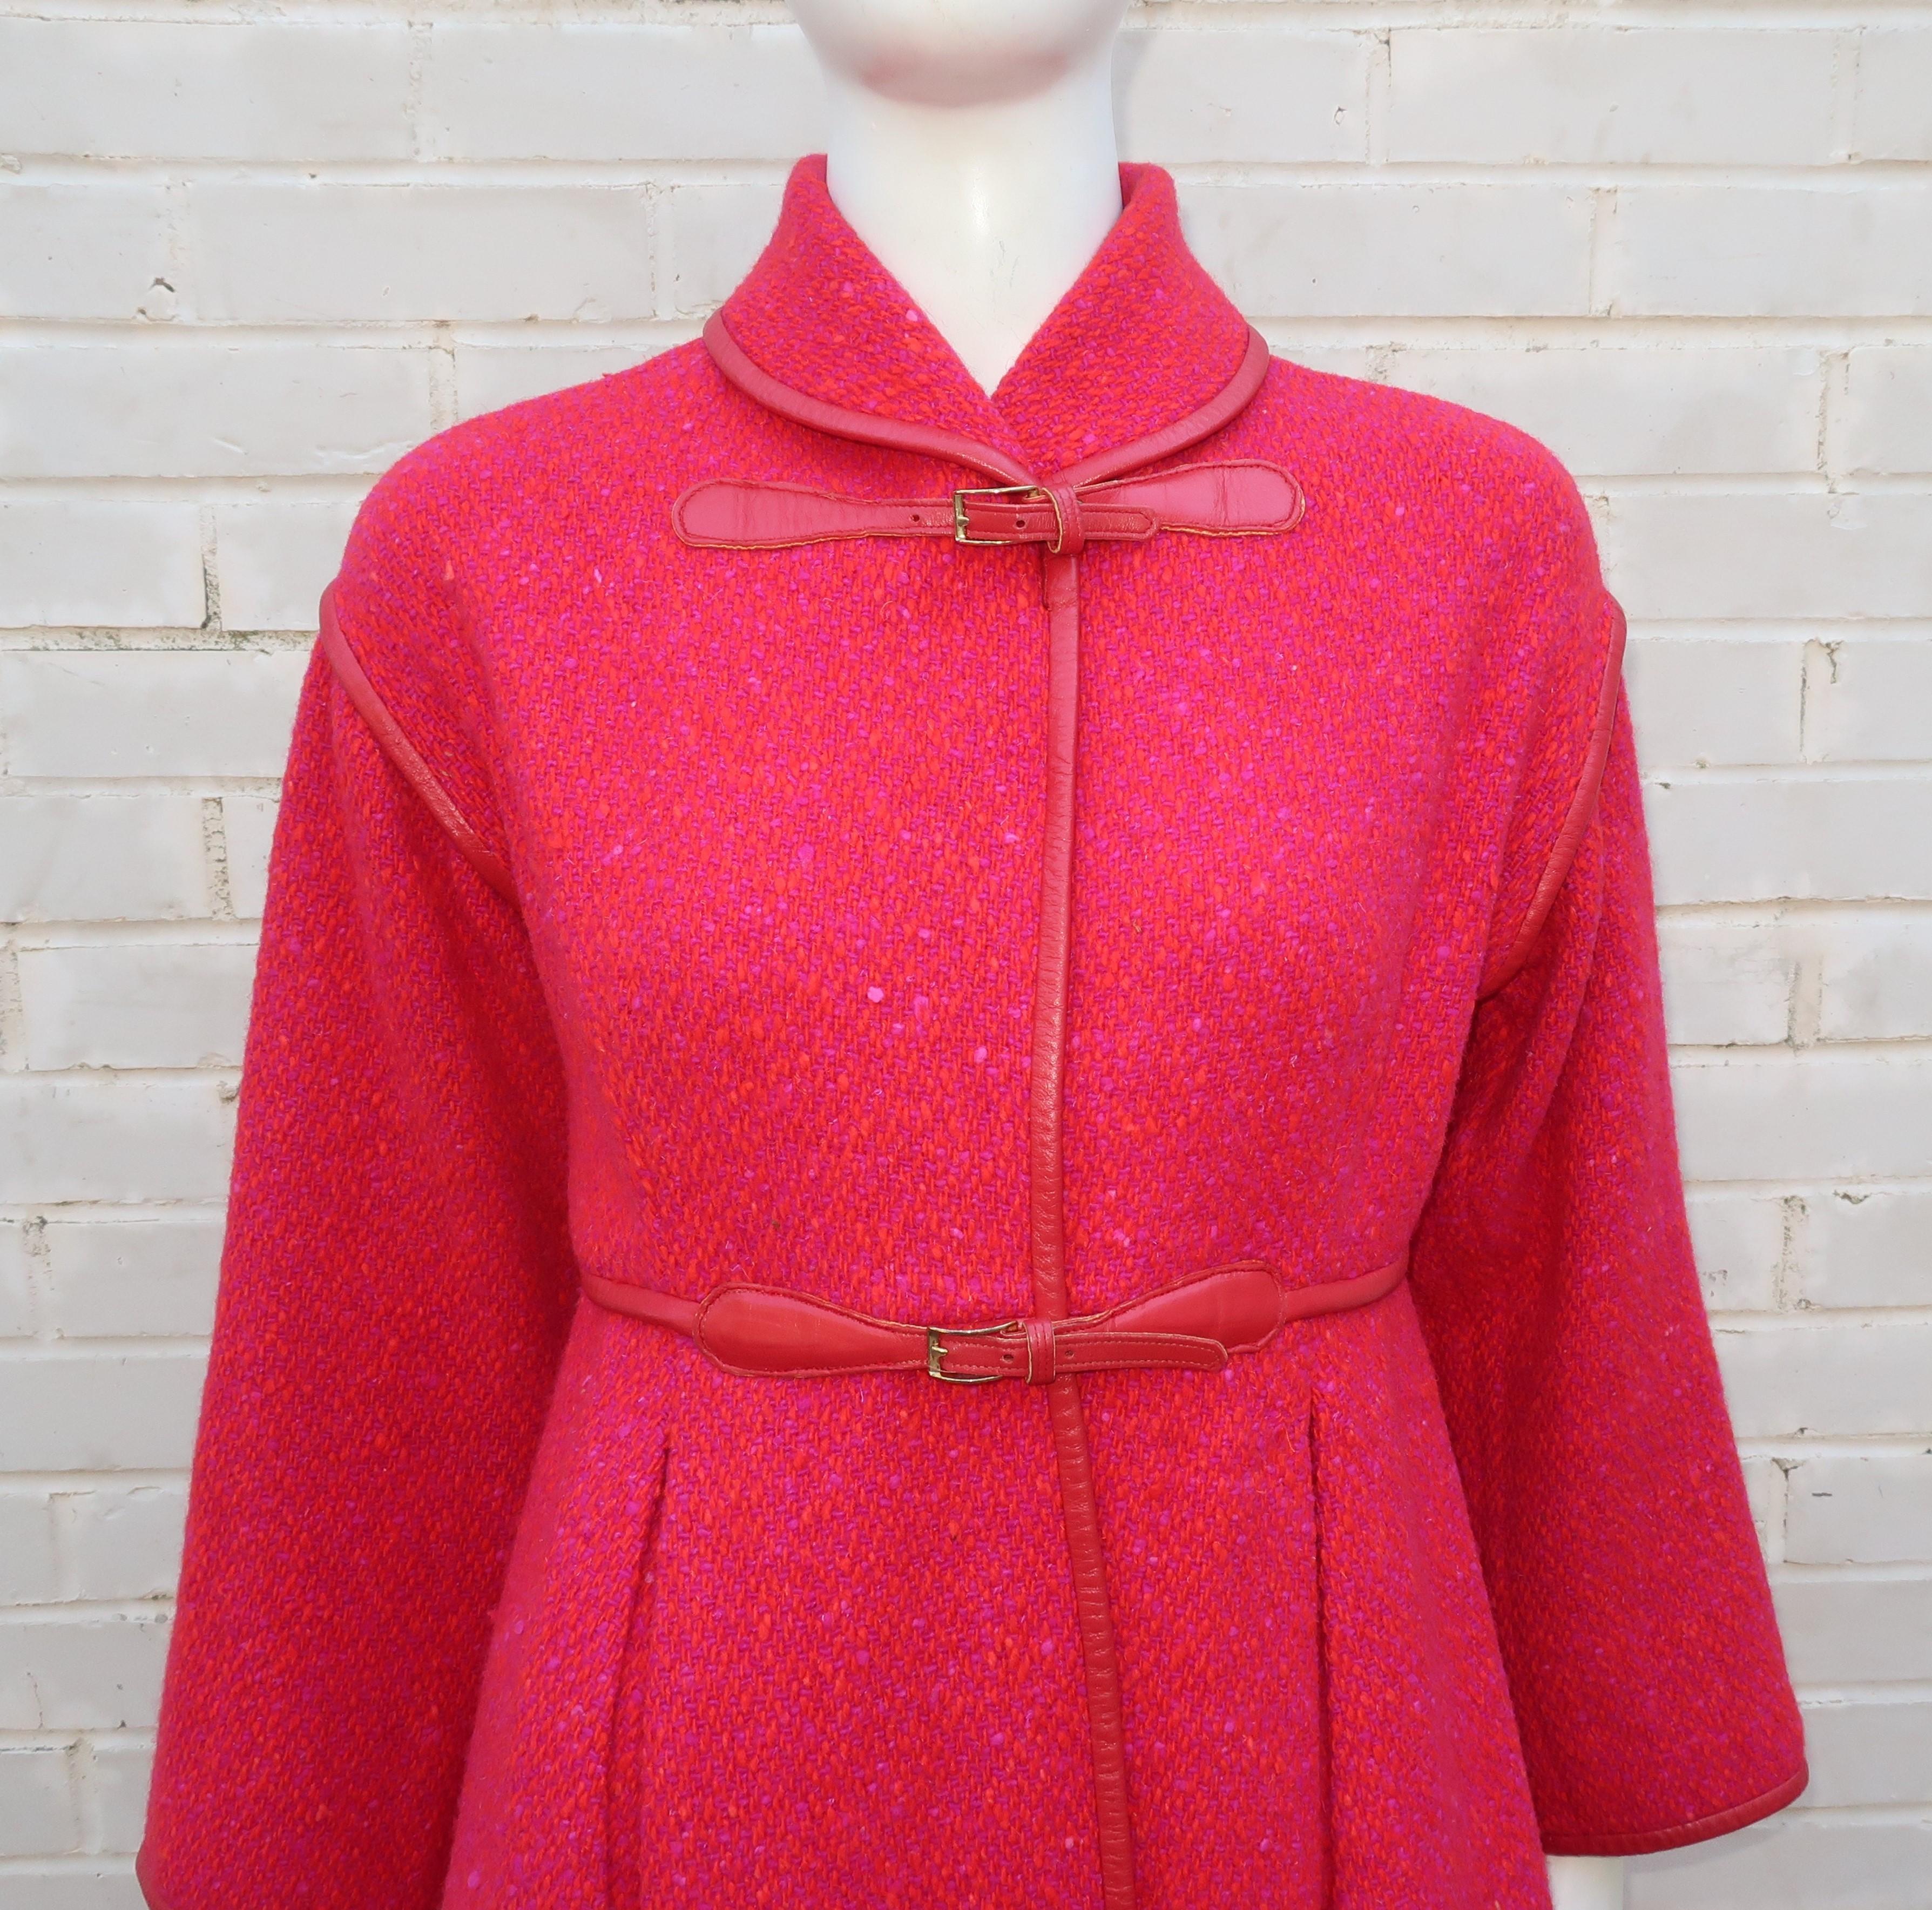 A fun 1960's wool tweed coat by one of the most influential and innovative American designers of the 20th century, Bonnie Cashin.  Ms. Cashin's fondness for mixing fabrics and textures is at play in this design with a nubby tweed fabric mixing red